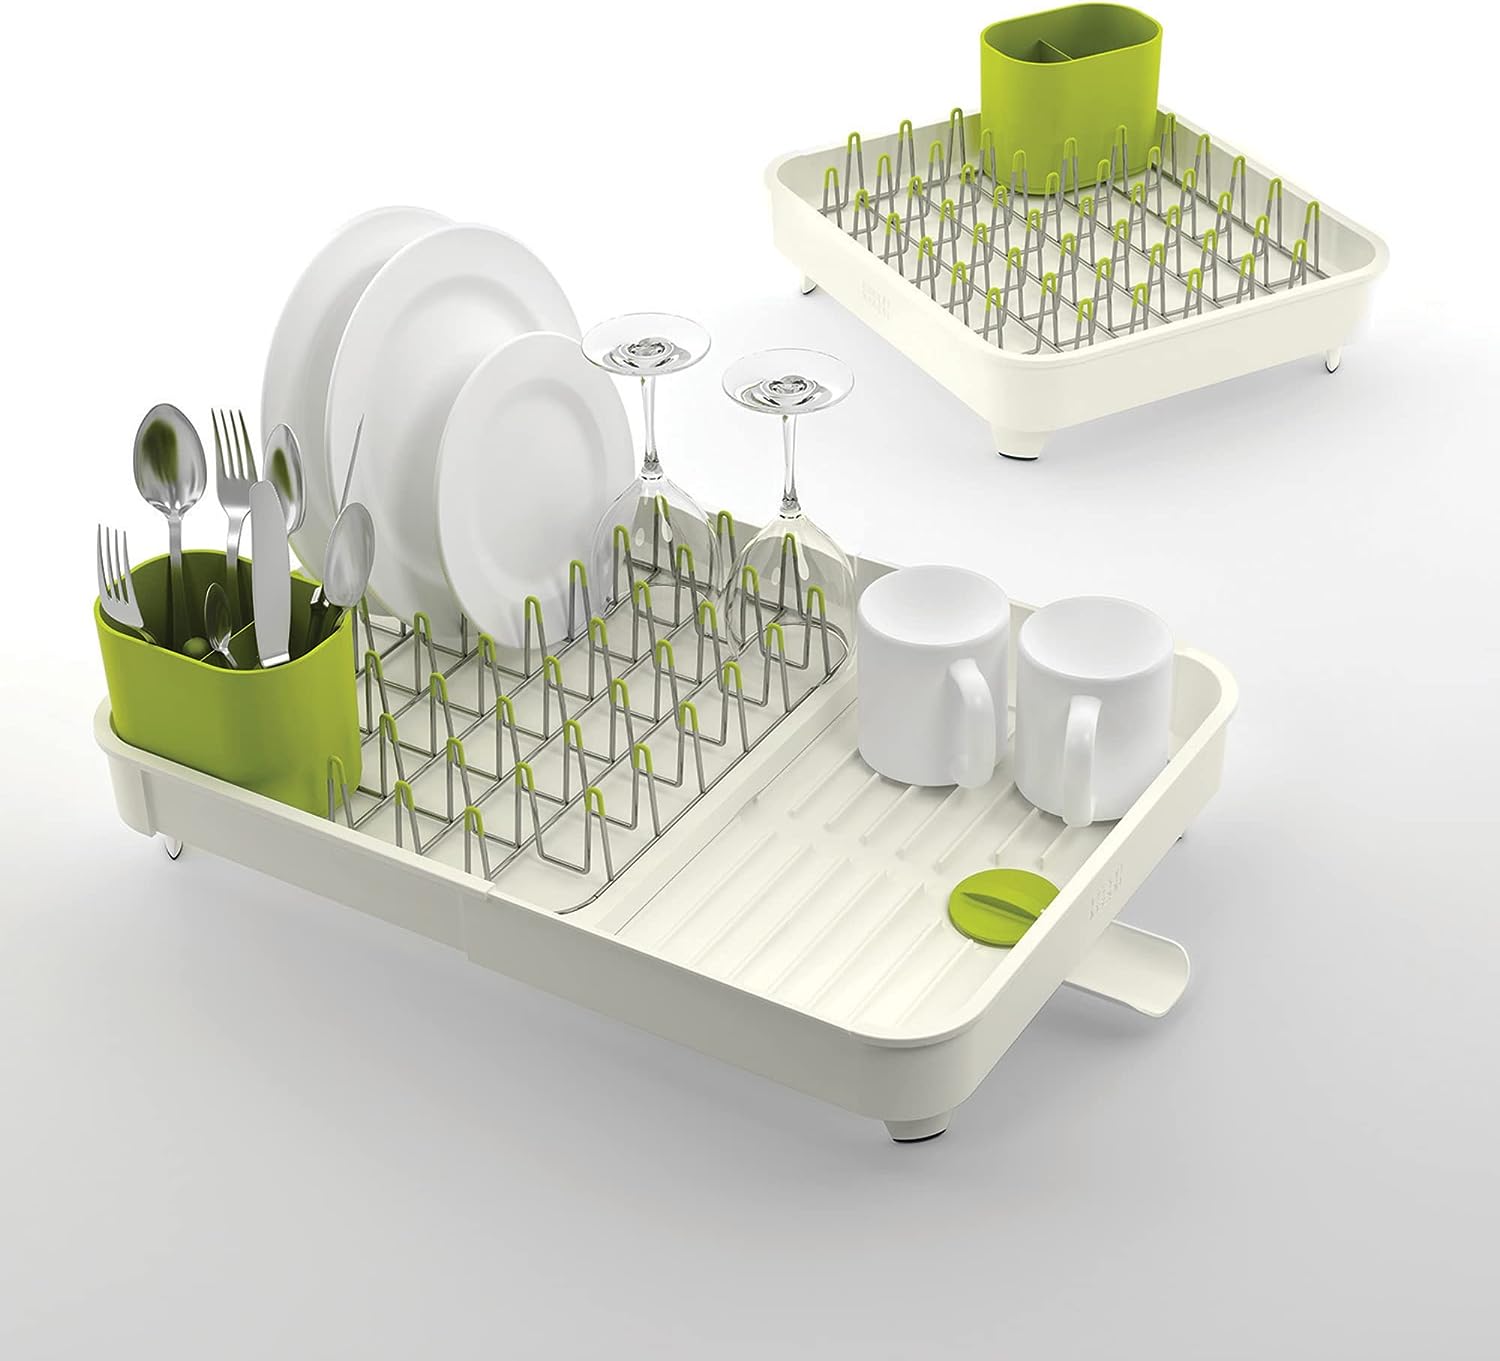 Joseph Joseph 85071 Extend Expandable Dish Drying Rack and Drainboard Set  Foldaway Integrated Spout Drainer Removable Steel Rack and Cutlery Holder,  White,White/Green - Plastic